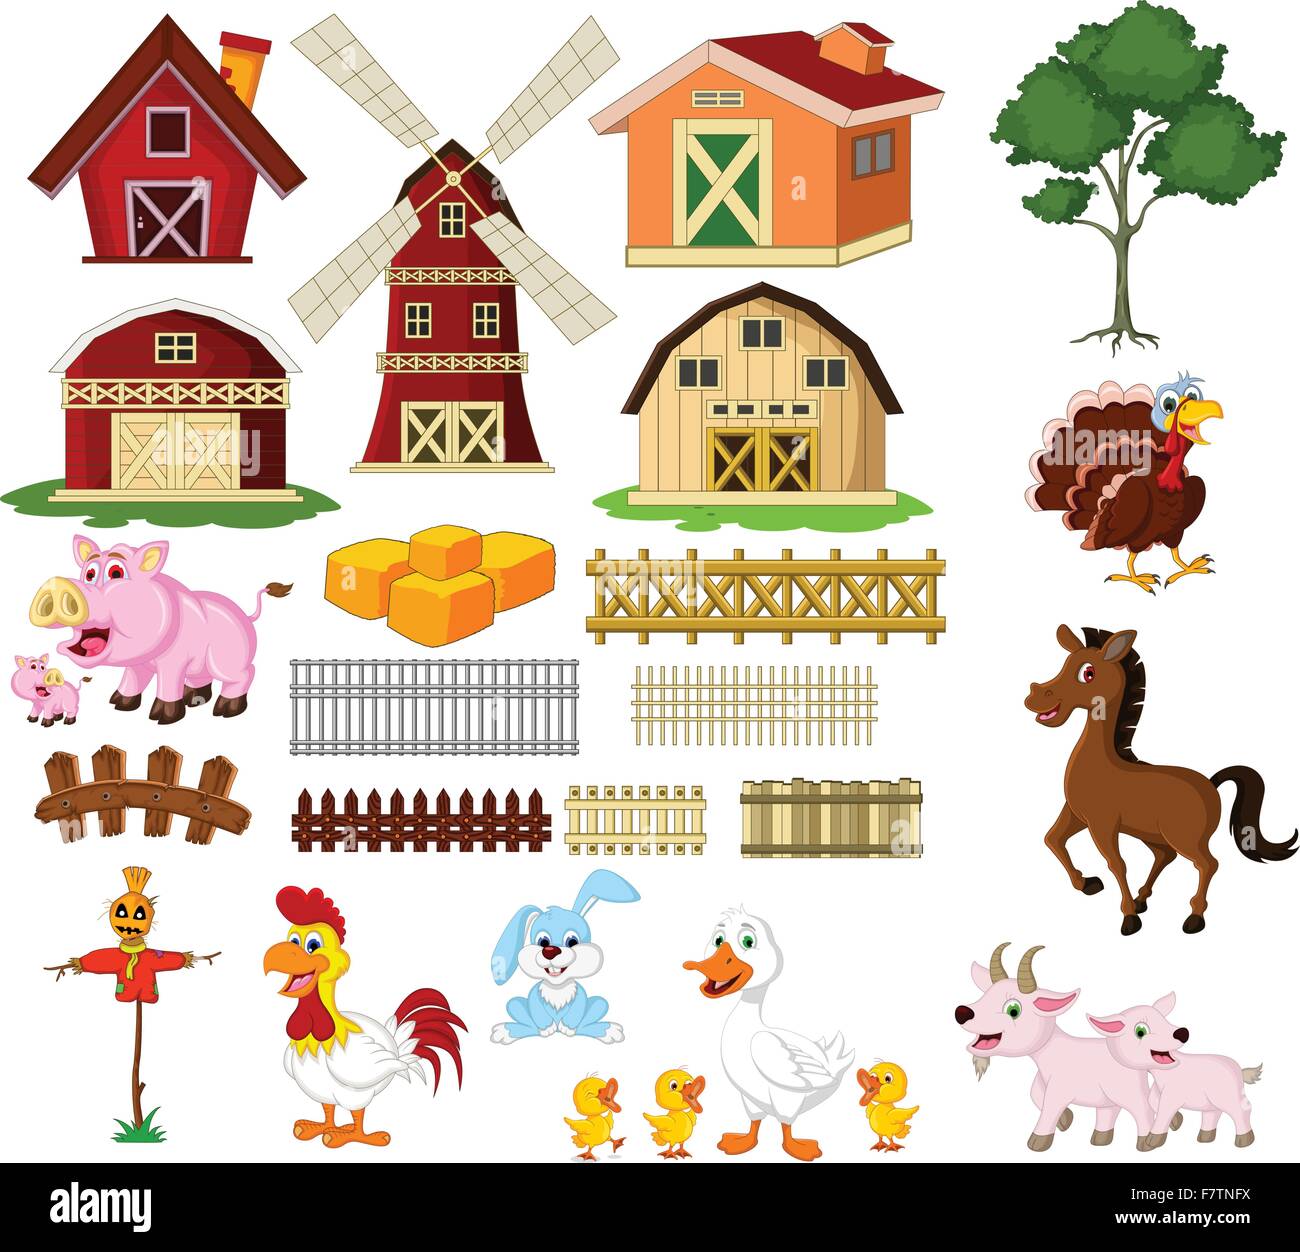 illustration of the things and animals at the farm Stock Vector